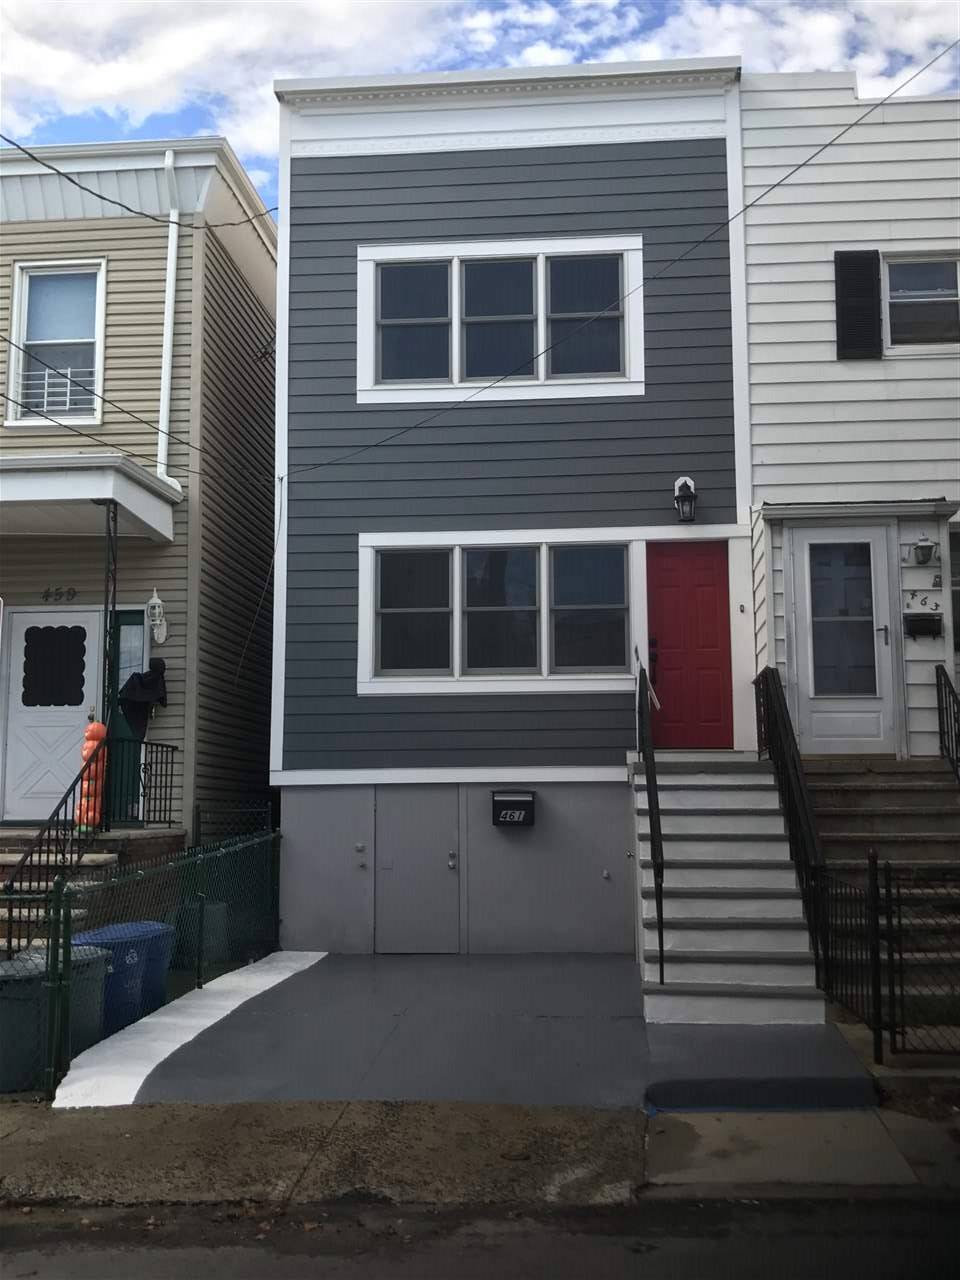 Townhouse Style - 3 BR New Jersey